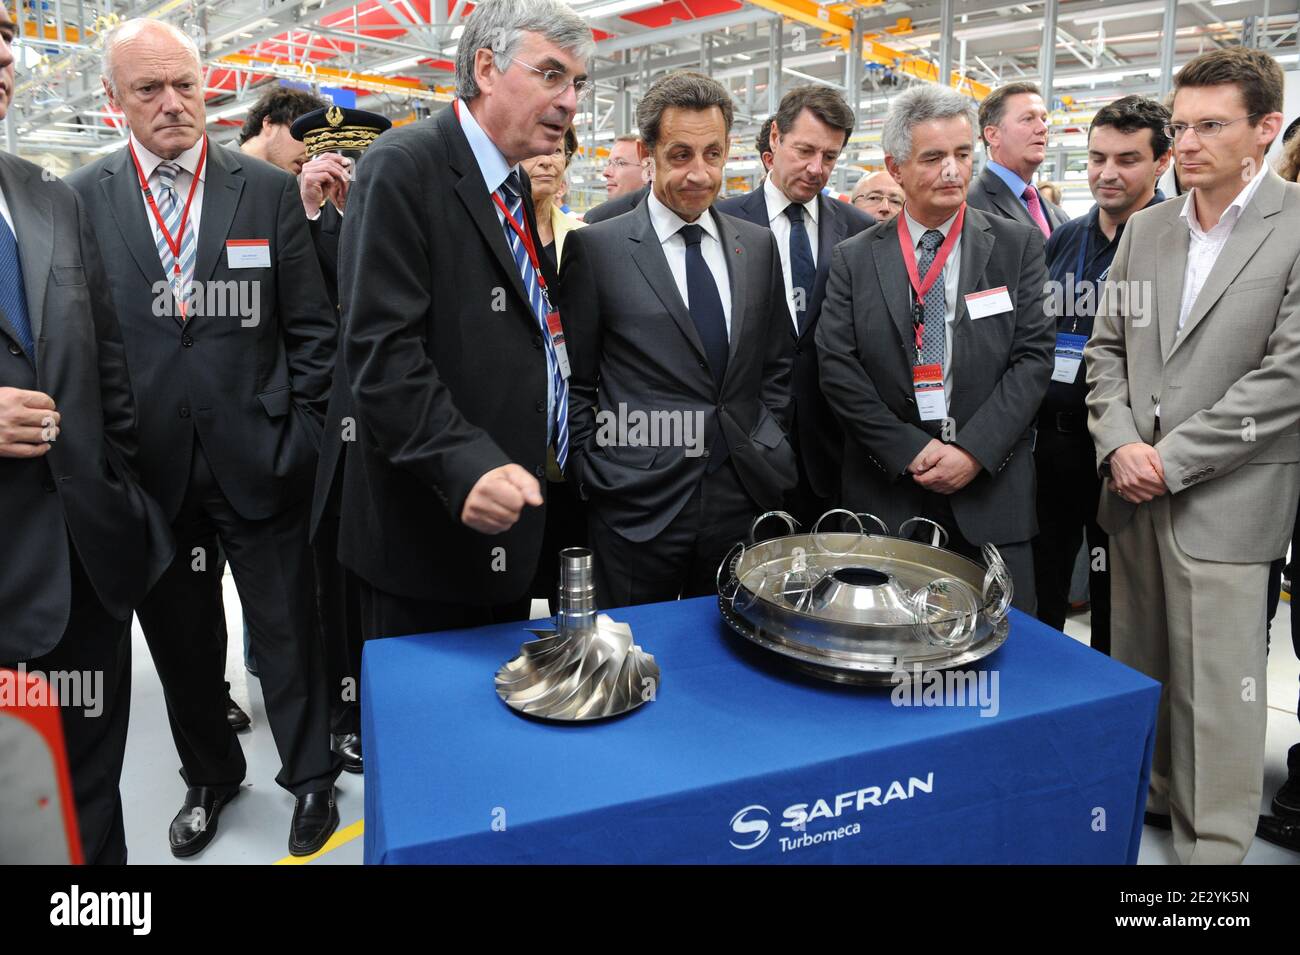 French President Nicolas Sarkozy flanked by Alain Rousset, Michele  Alliot-Marie and Christian Estrosi inaugurates Turbomeca's Joseph  Szydlowski plant in a ceremony attended by Jean Paul Herteman, CRO of Safran,  and Pierre Fabre,